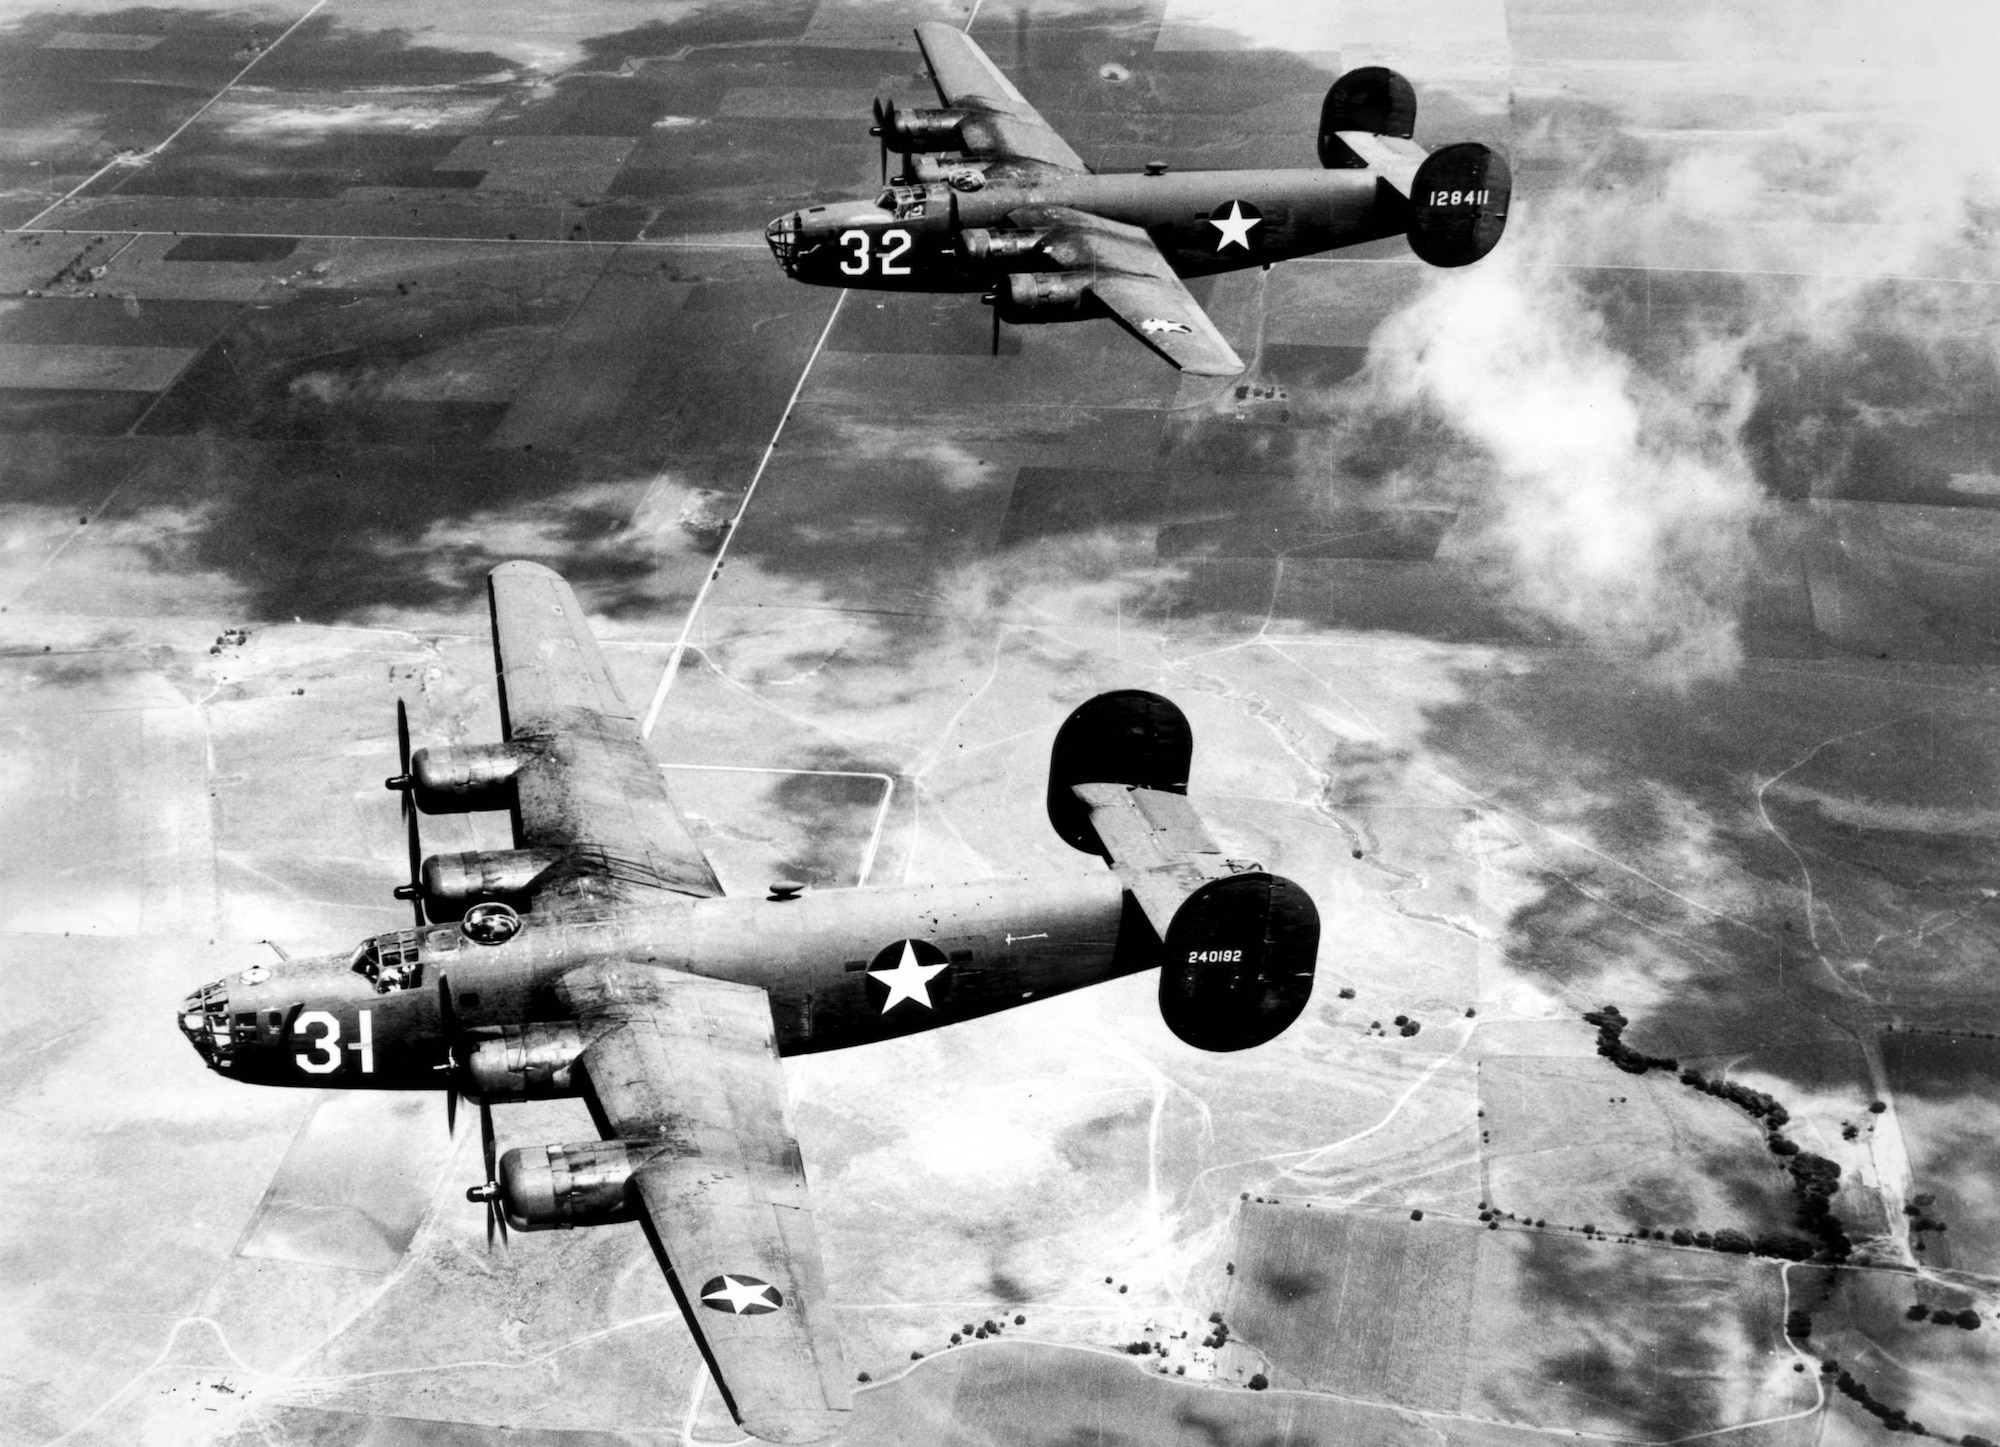 1940's -- The B-24 "Liberator" was suitable for long, over-water missions. (U.S. Air Force photo)